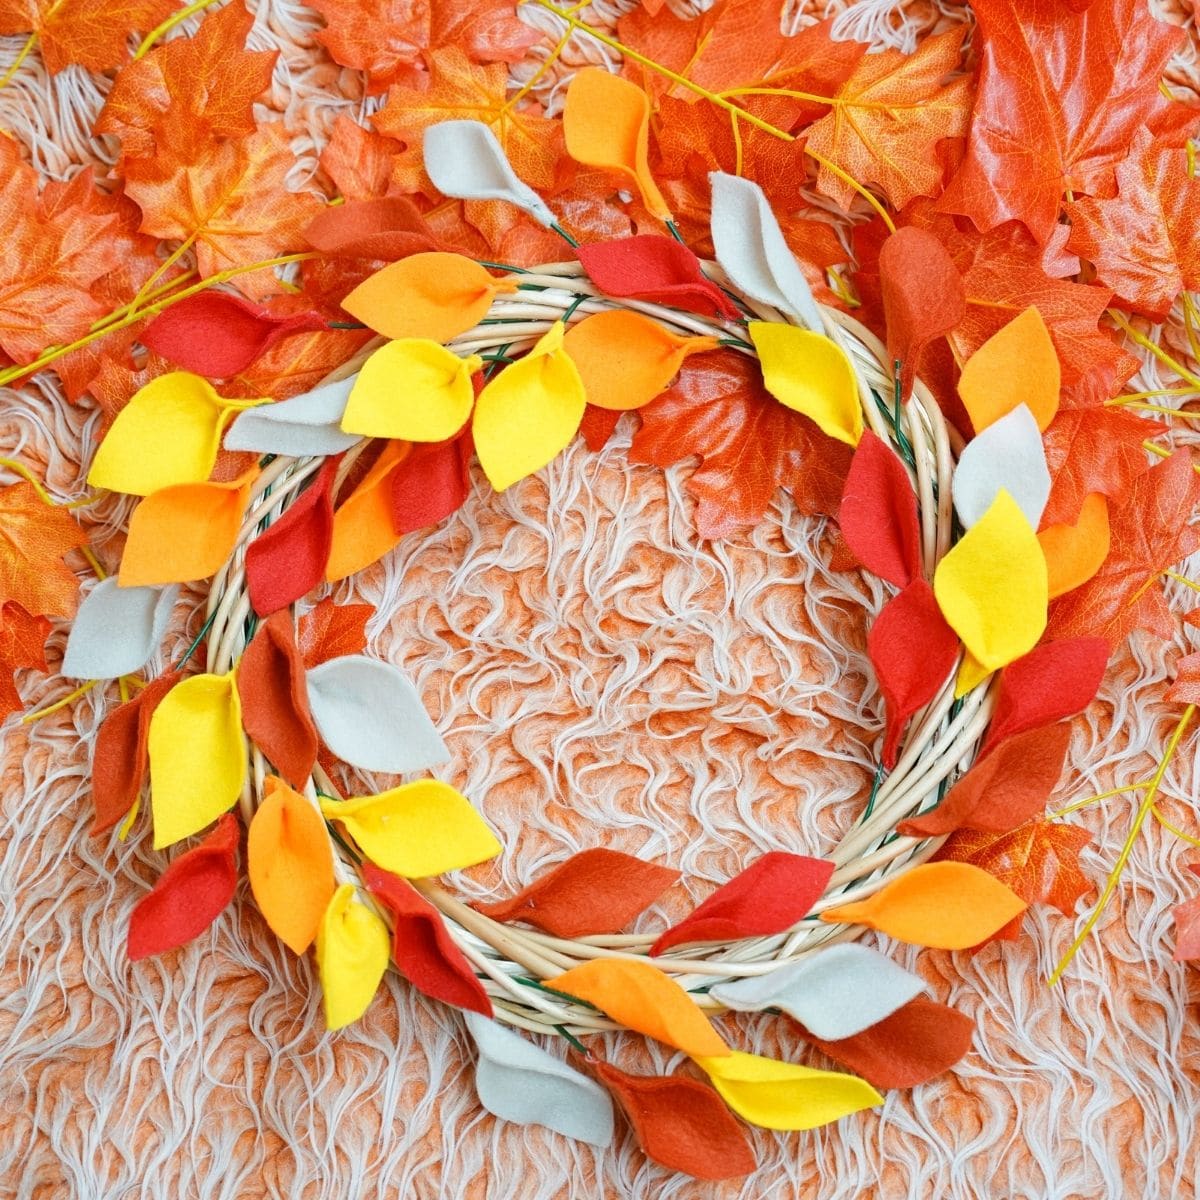 Fall leaf wreath on orange rug surrounded by fake leaves